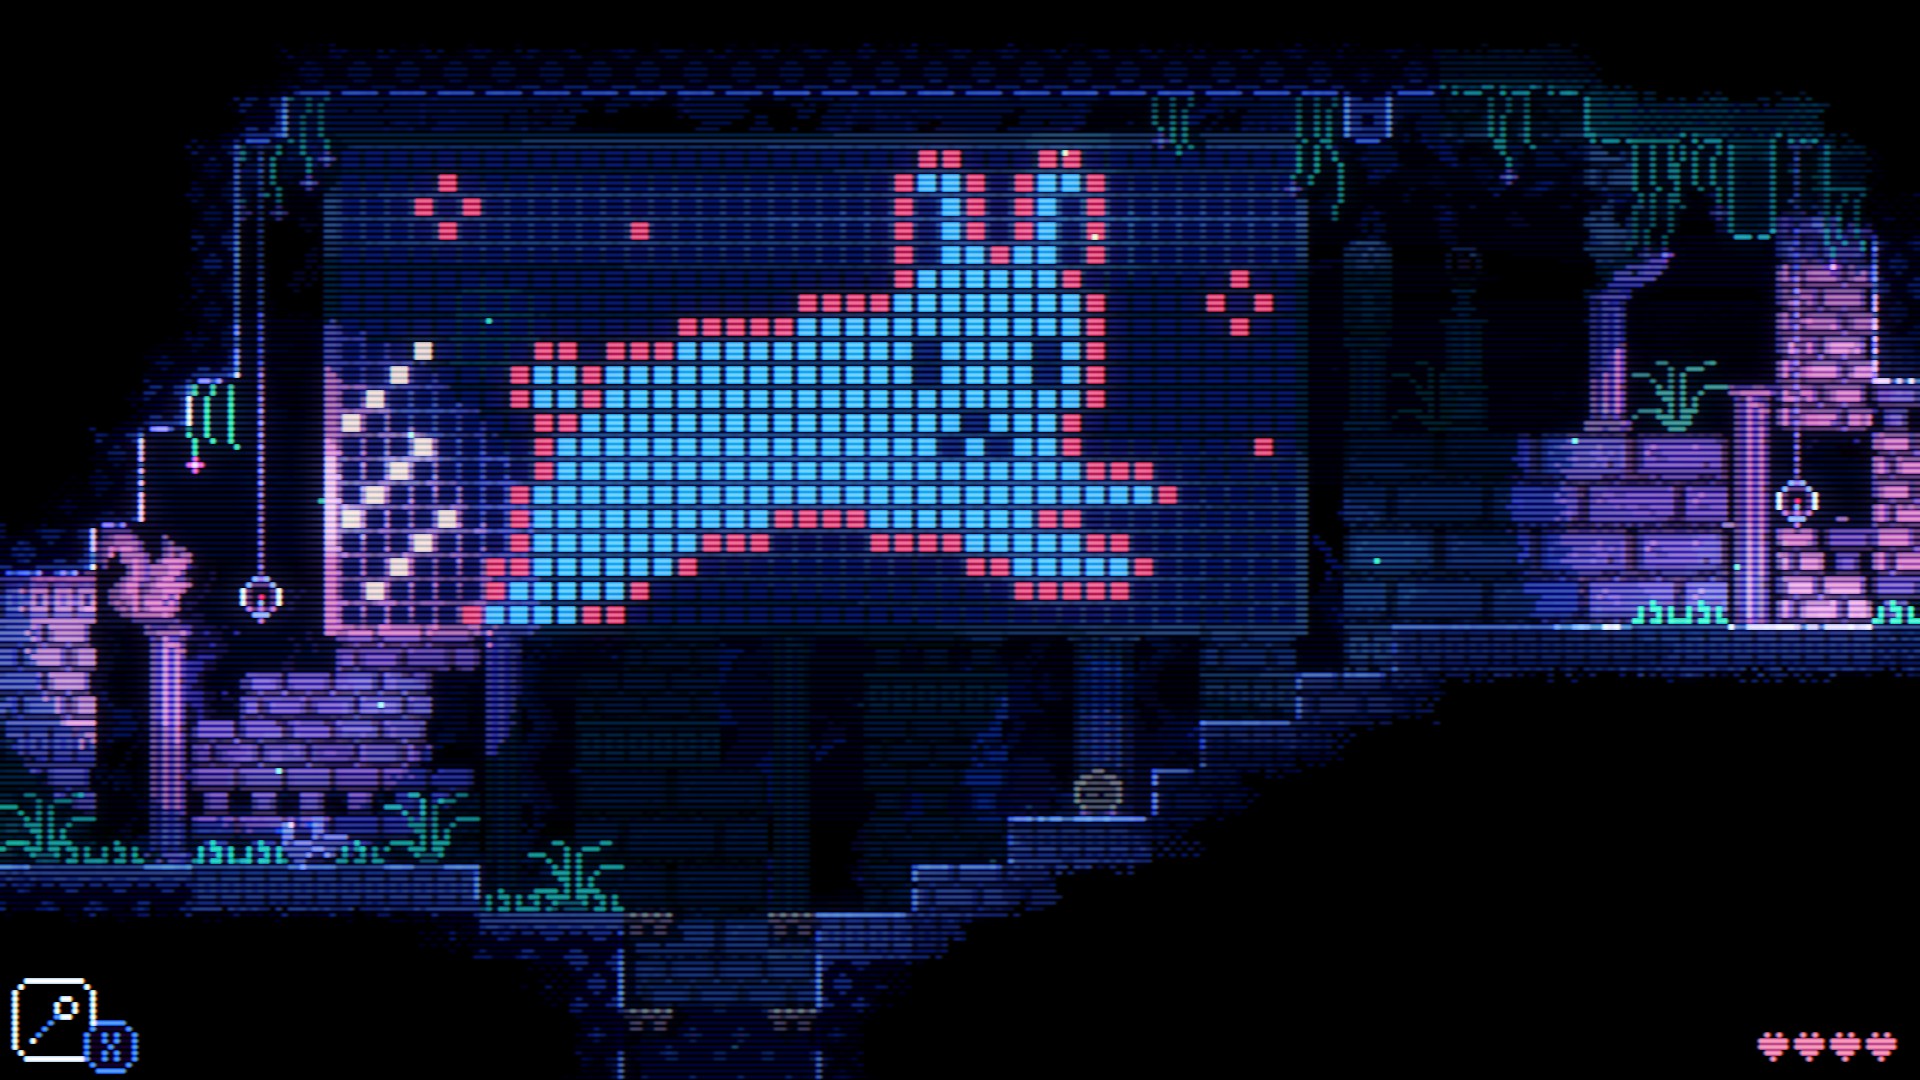  Animal Well is shaping up to be the most acclaimed metroidvania since Hollow Knight 